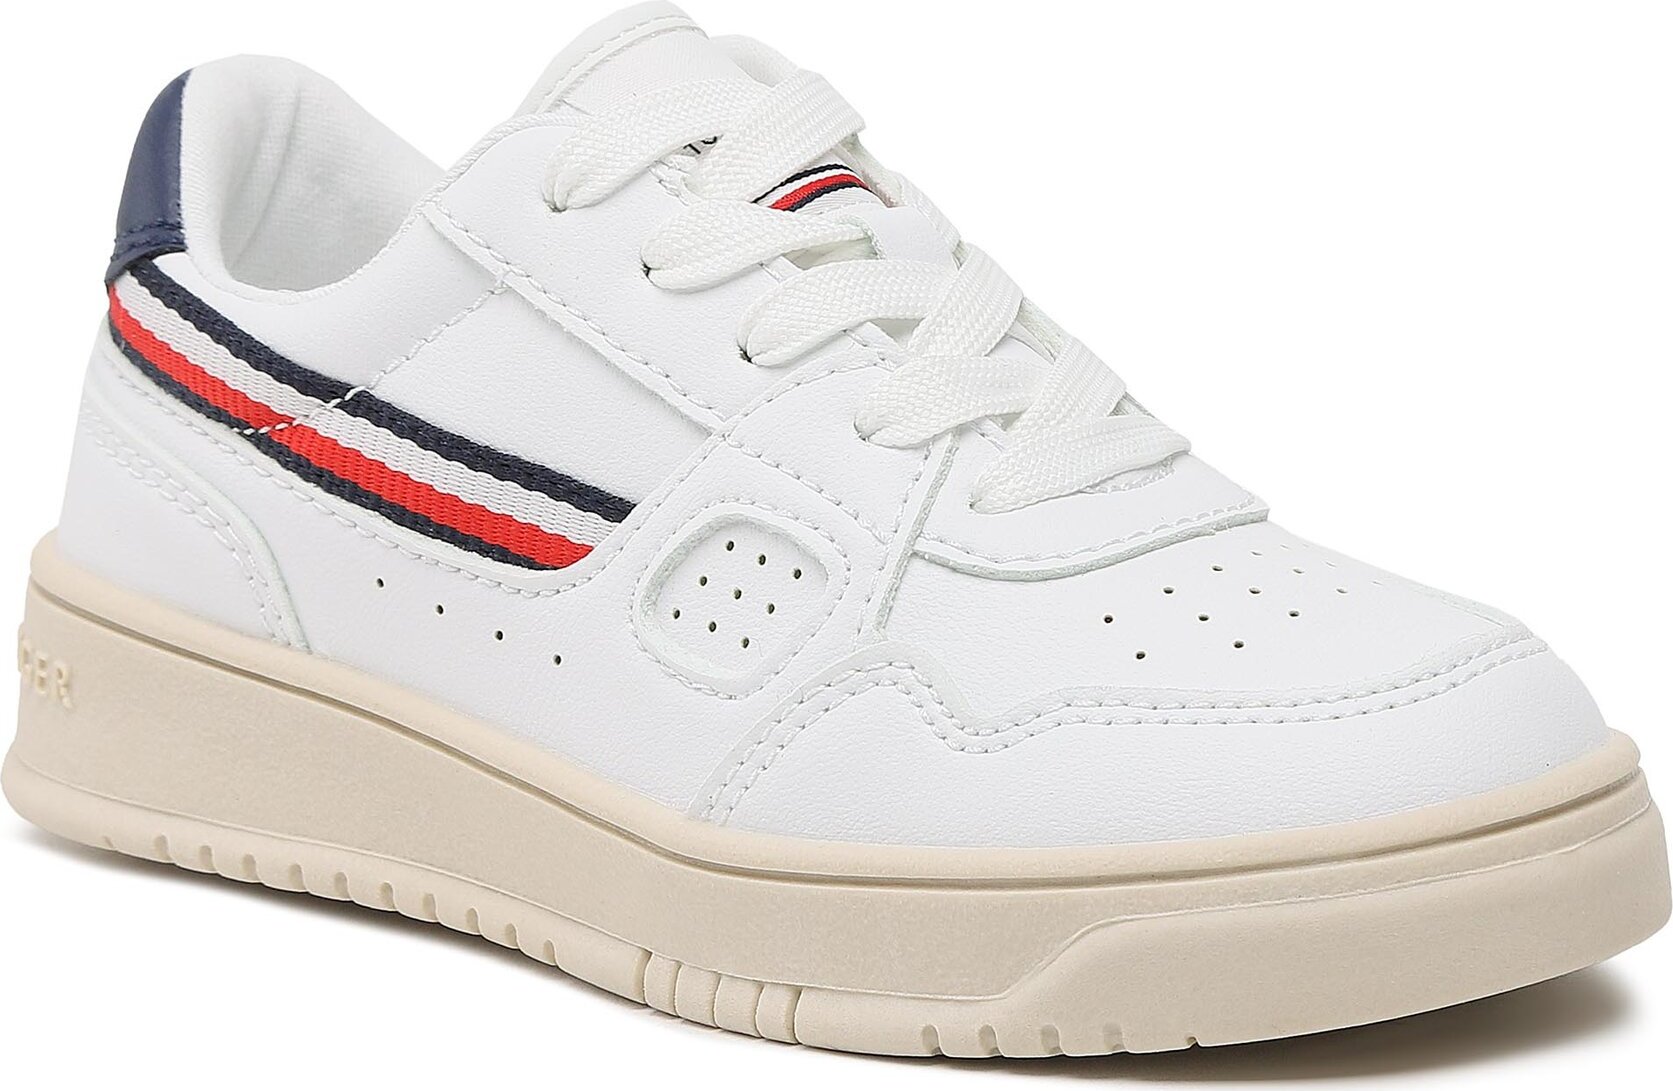 Sneakersy Tommy Hilfiger Stripes Low Cut Lace-Up Sneaker T3X9-32848-1355 M White 100